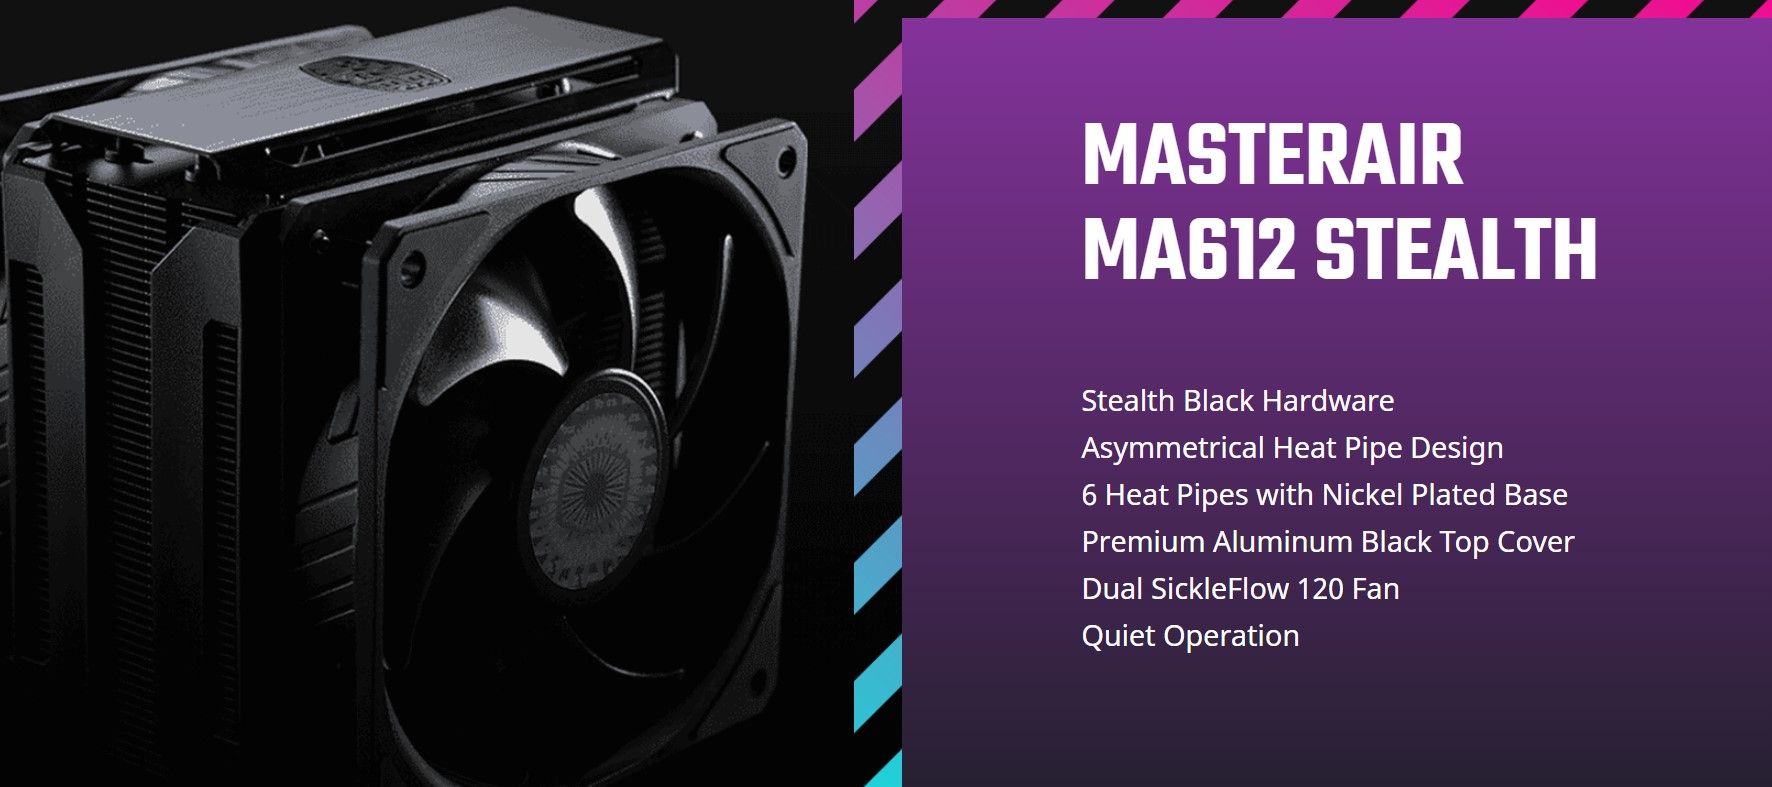 Cooler Master MA612 Stealth Review  “It’s Time For An Upgrade”